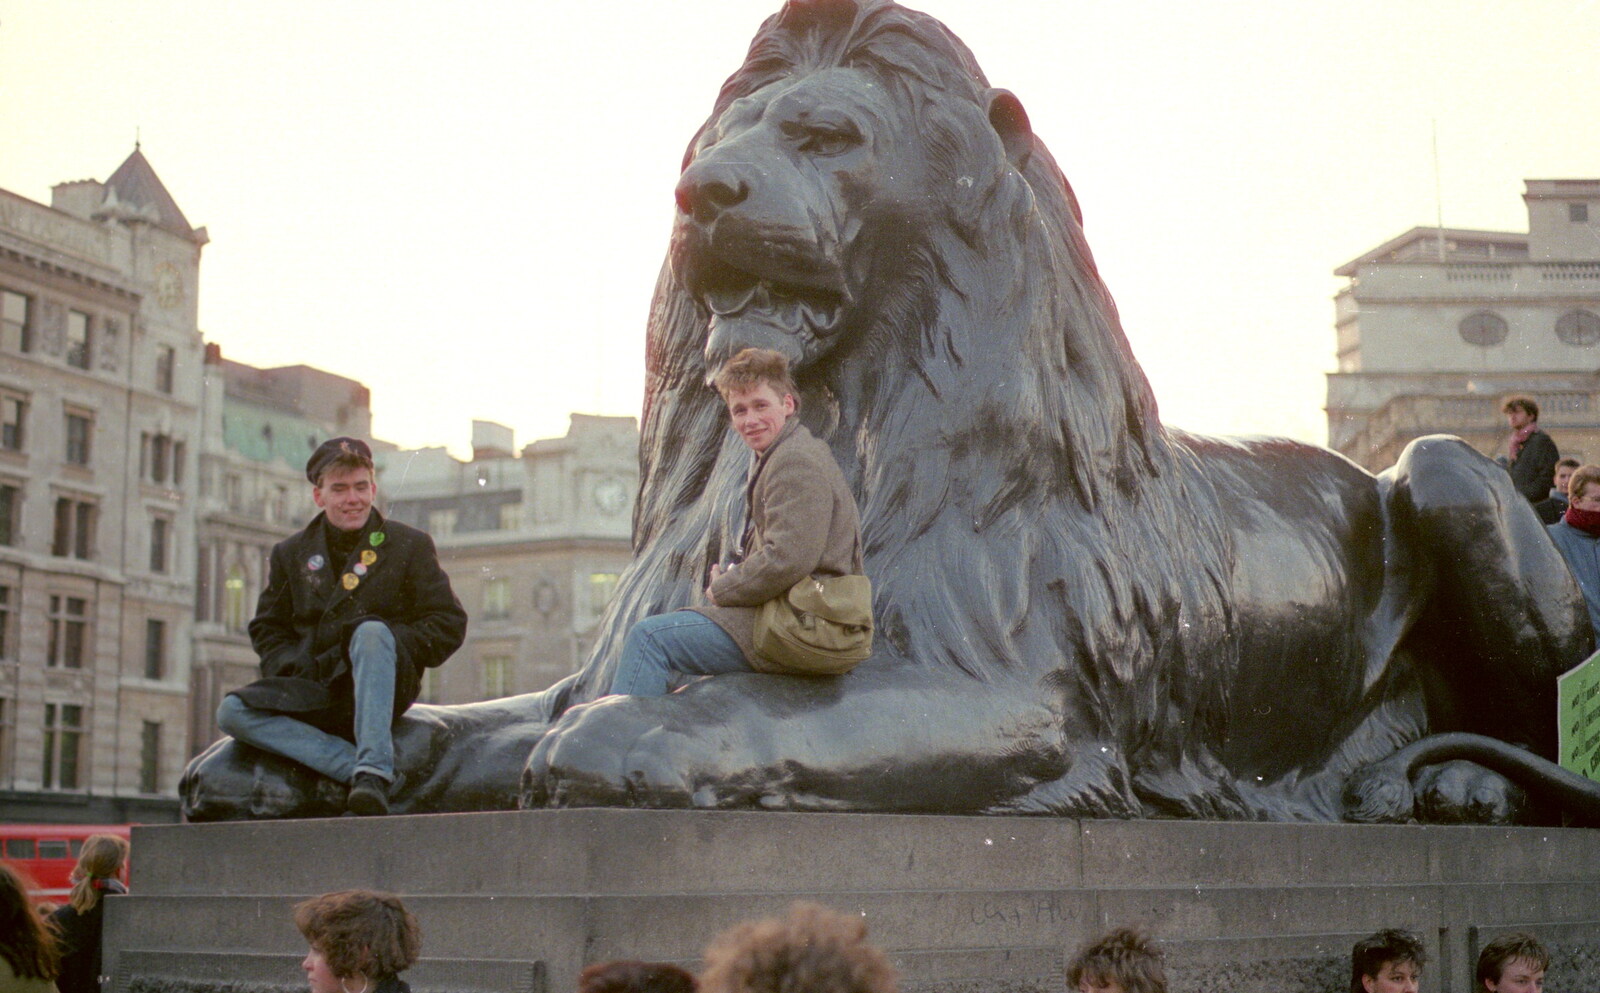 Occupying the Trafalgar lions from Uni: No Chance Fowler! A student Demonstration, London - 26th February 1986